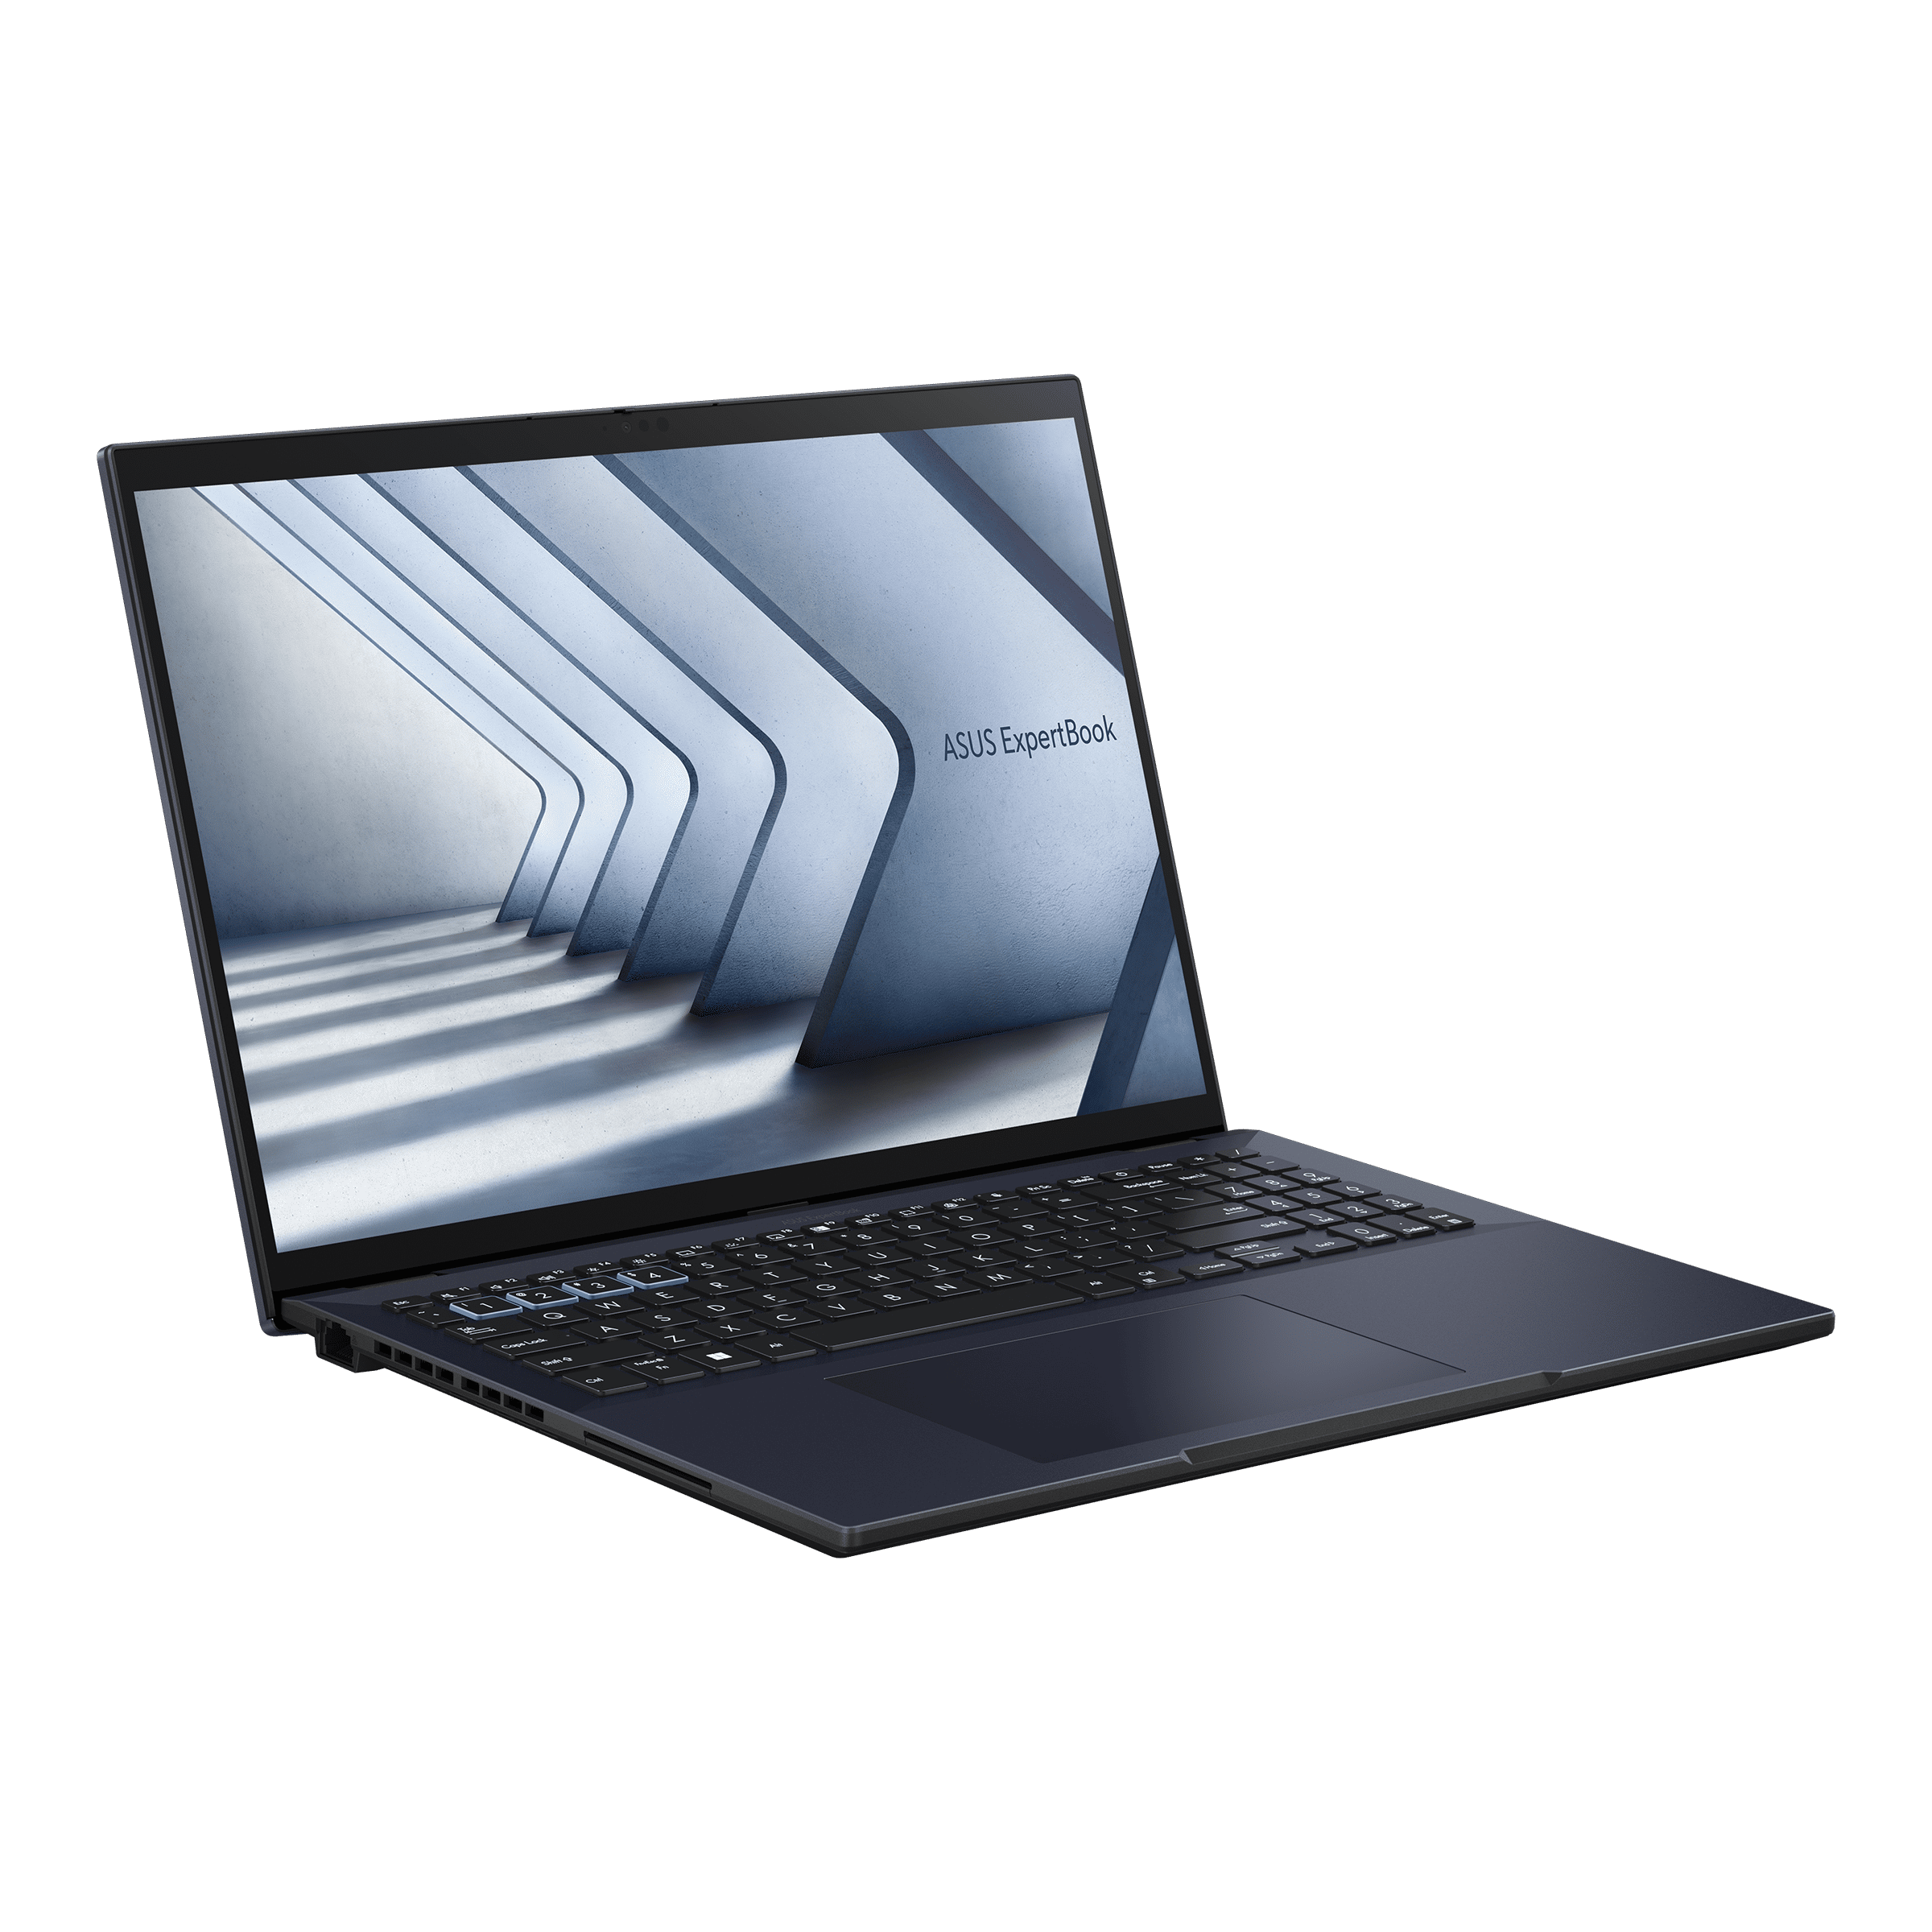 ExpertBook B3 (B3604) - Tech Specs｜Laptops For Work｜ASUS Canada